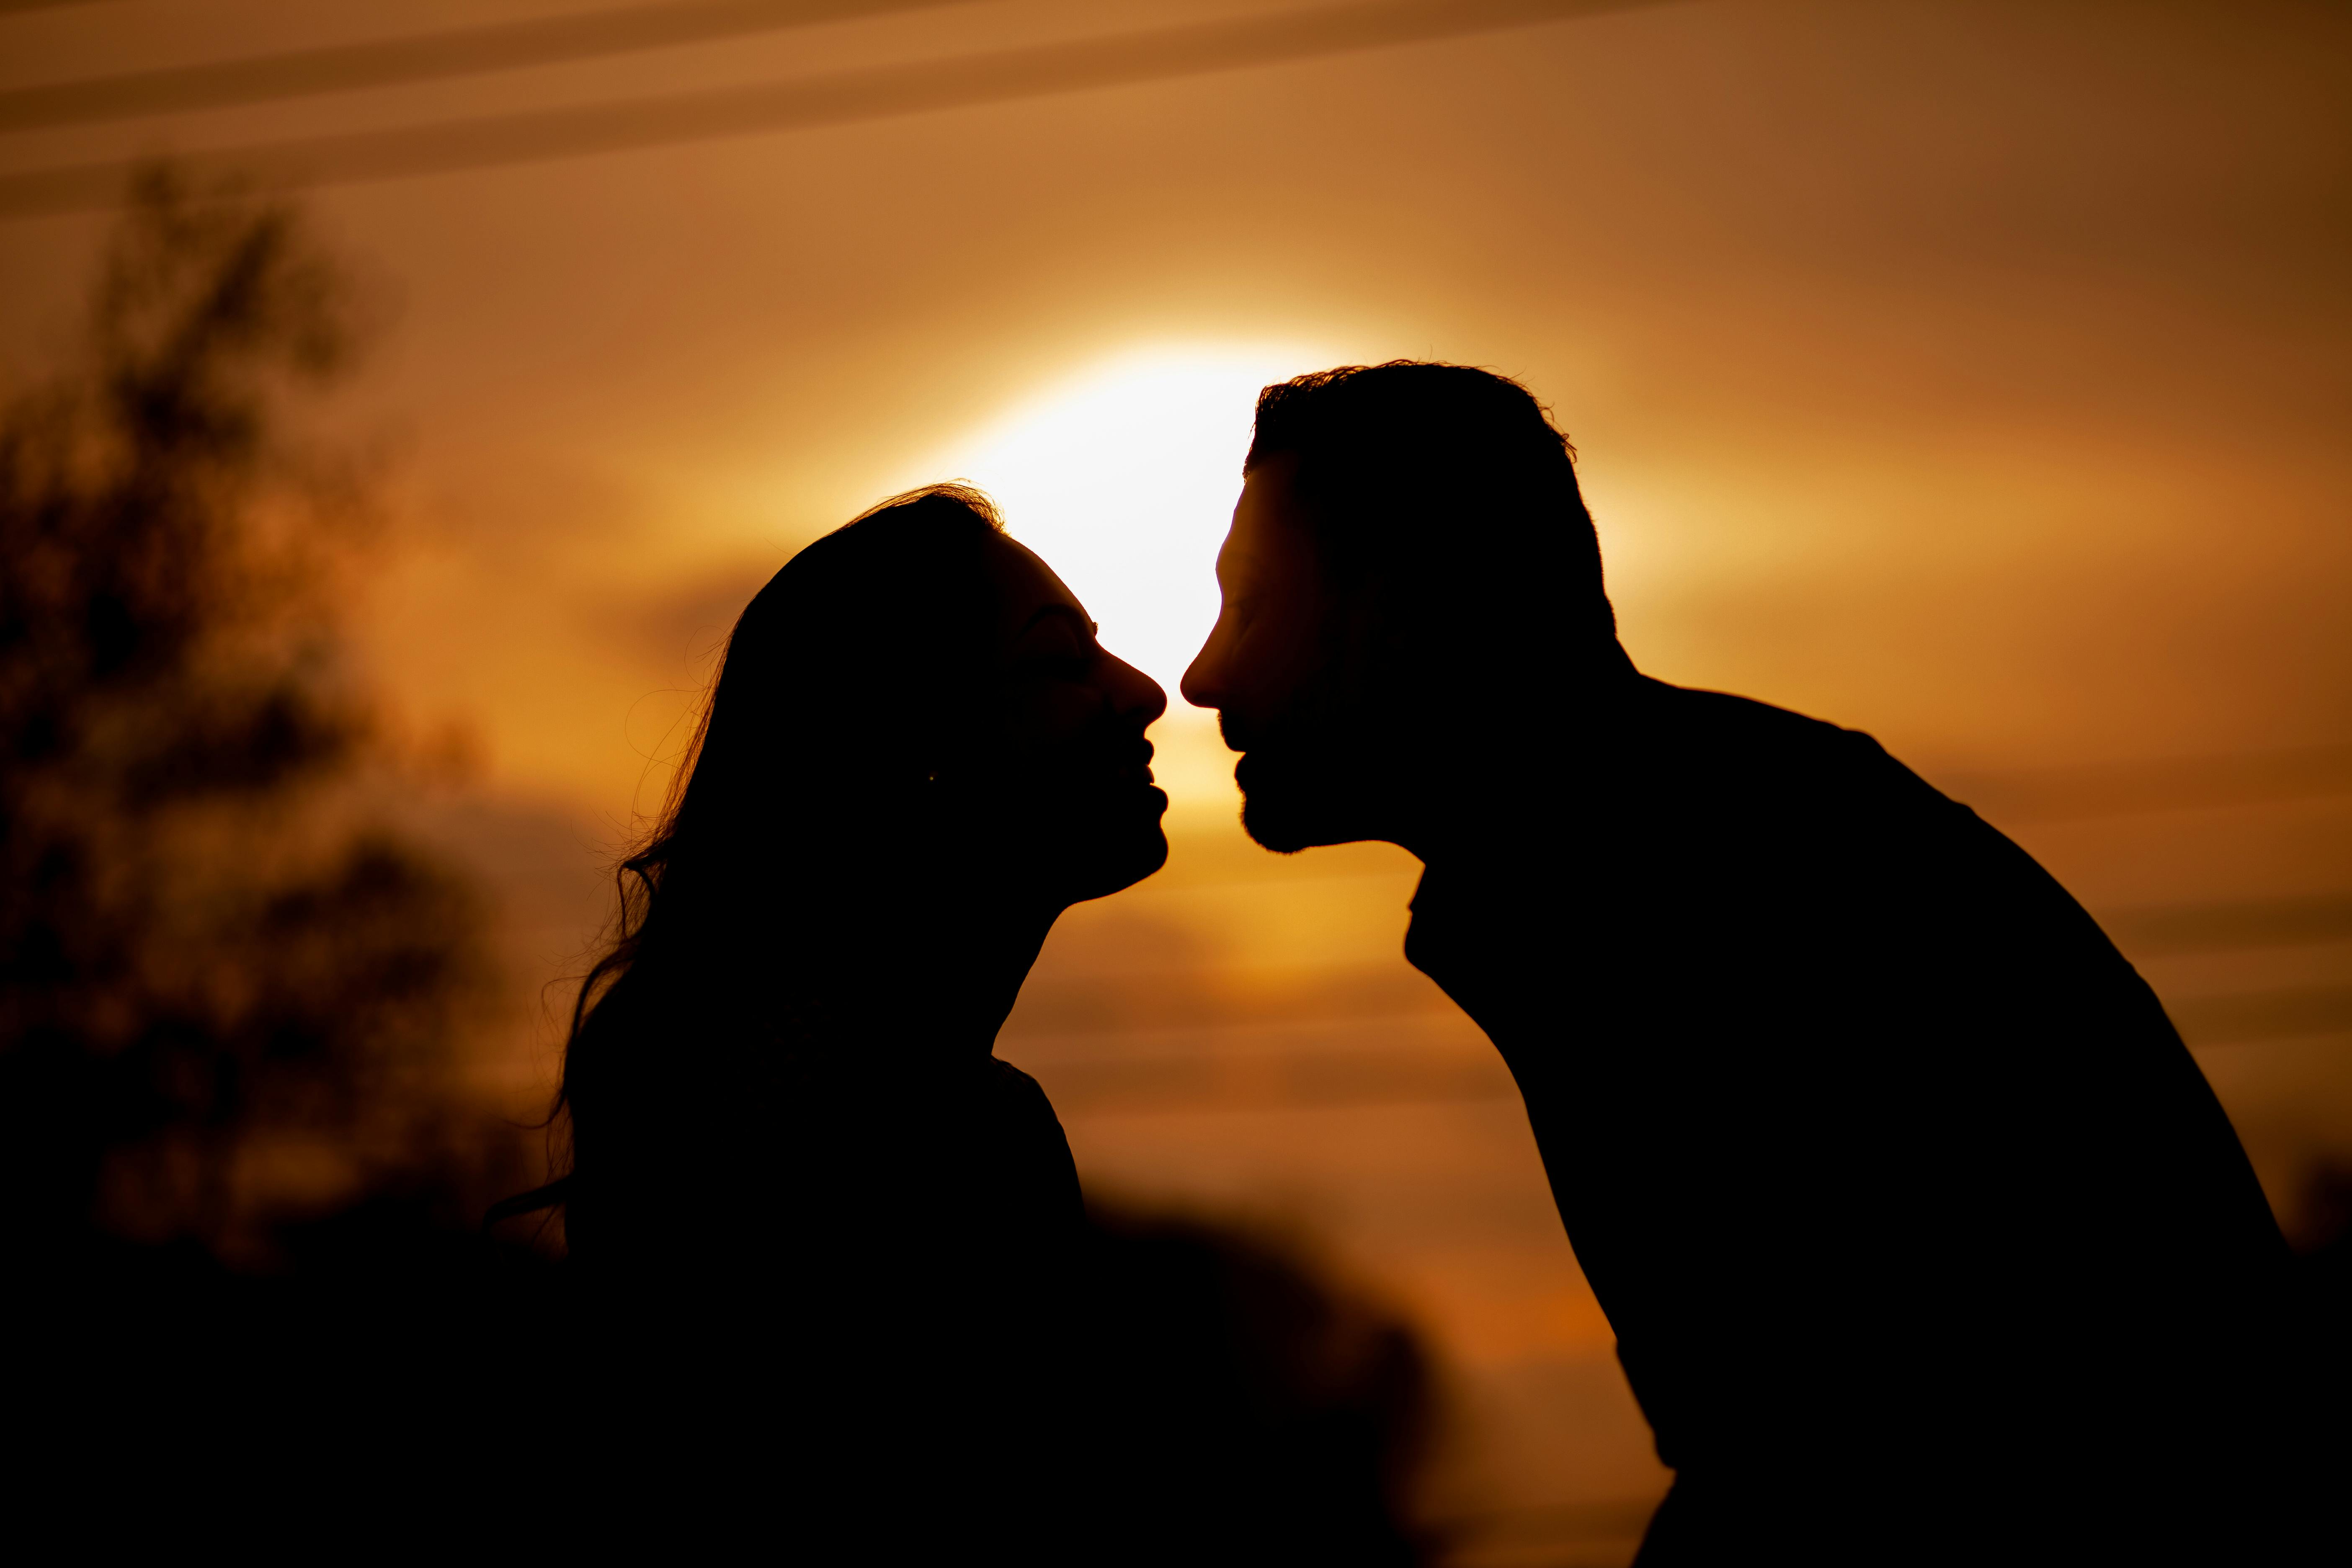 Silhouette of a happy couple enjoying sunset | Source: Pexels